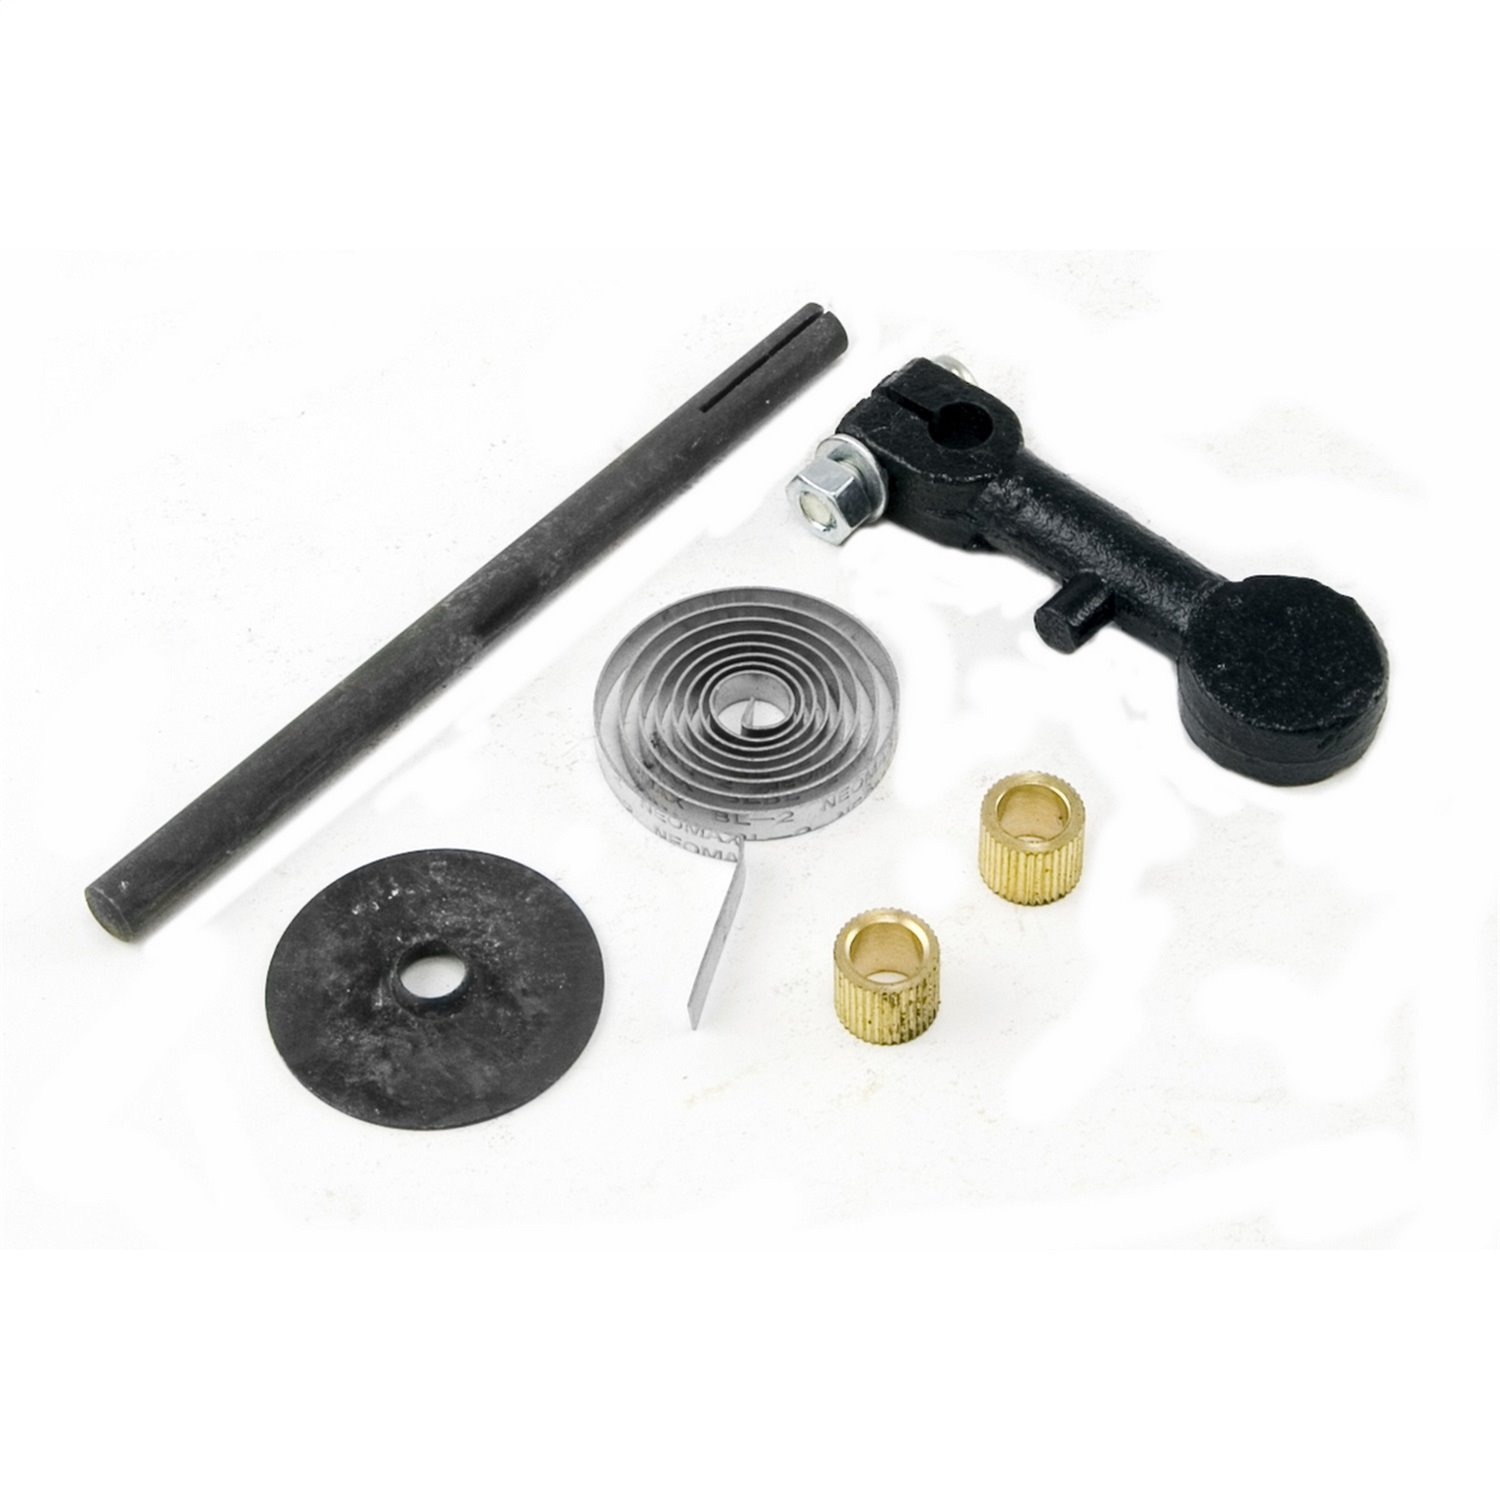 This exhaust manifold hardware kit from Omix-ADA fits